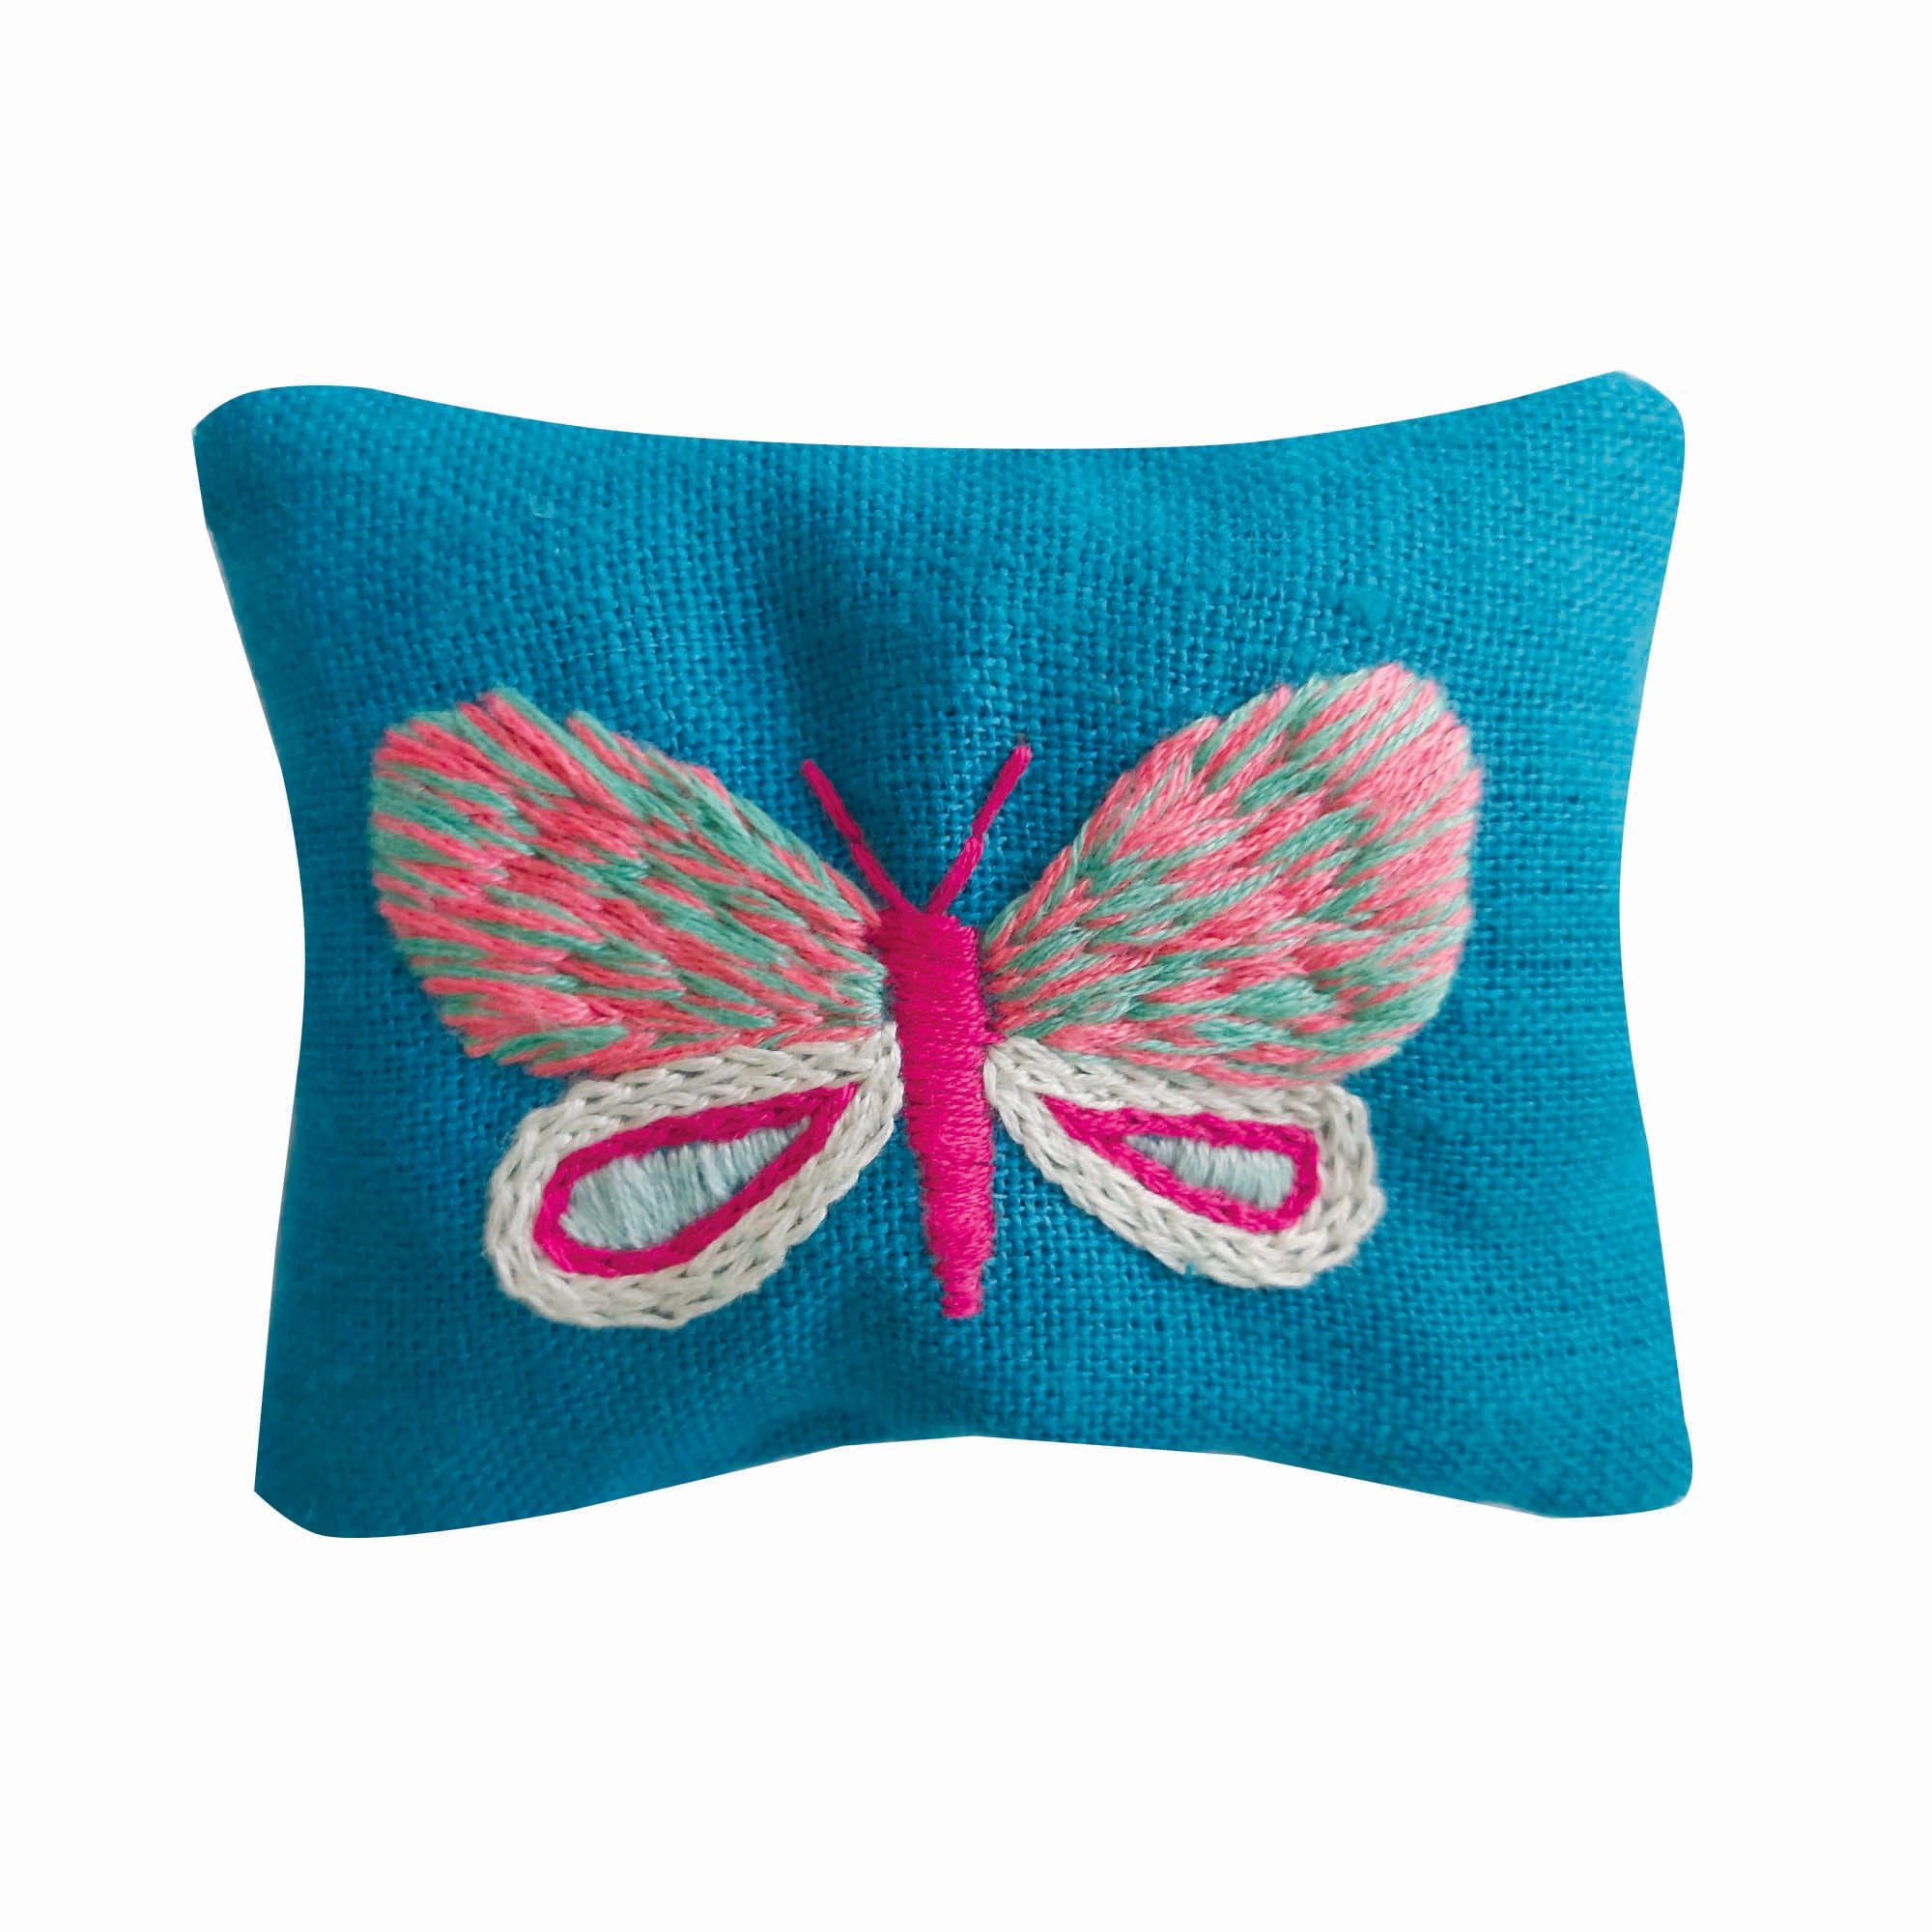 Butterfly Embroidered Lavender Bag Turquoise